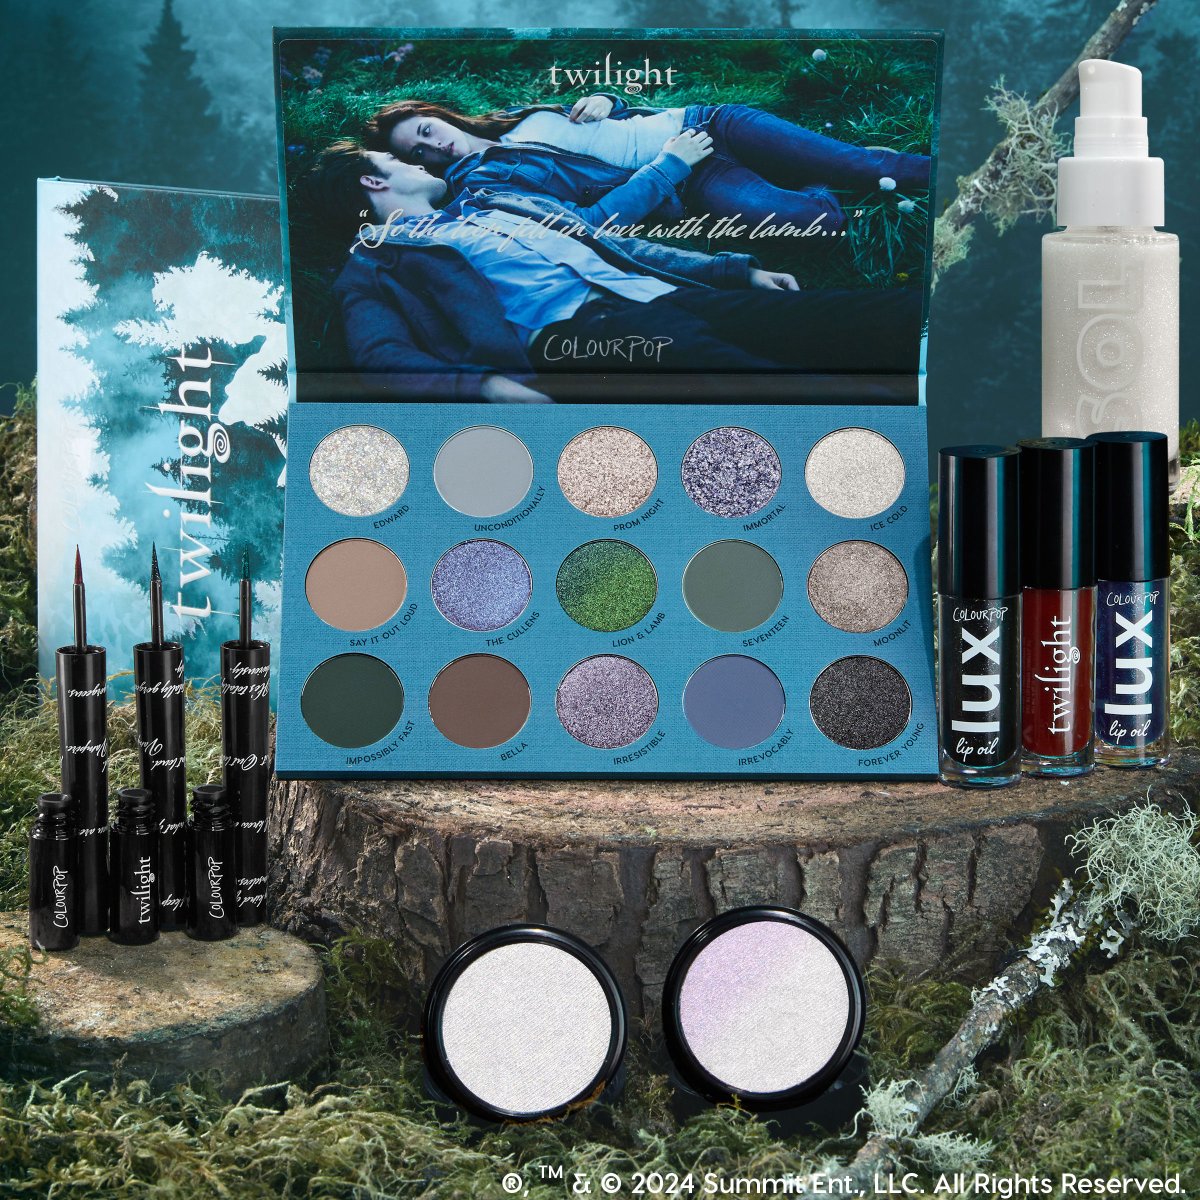 Hold on tight, spider monkey… 🌲🖤Get ready for the Twilight X ColourPop Collection you’ve all been asking for… it’s sure to sell out impossibly fast.